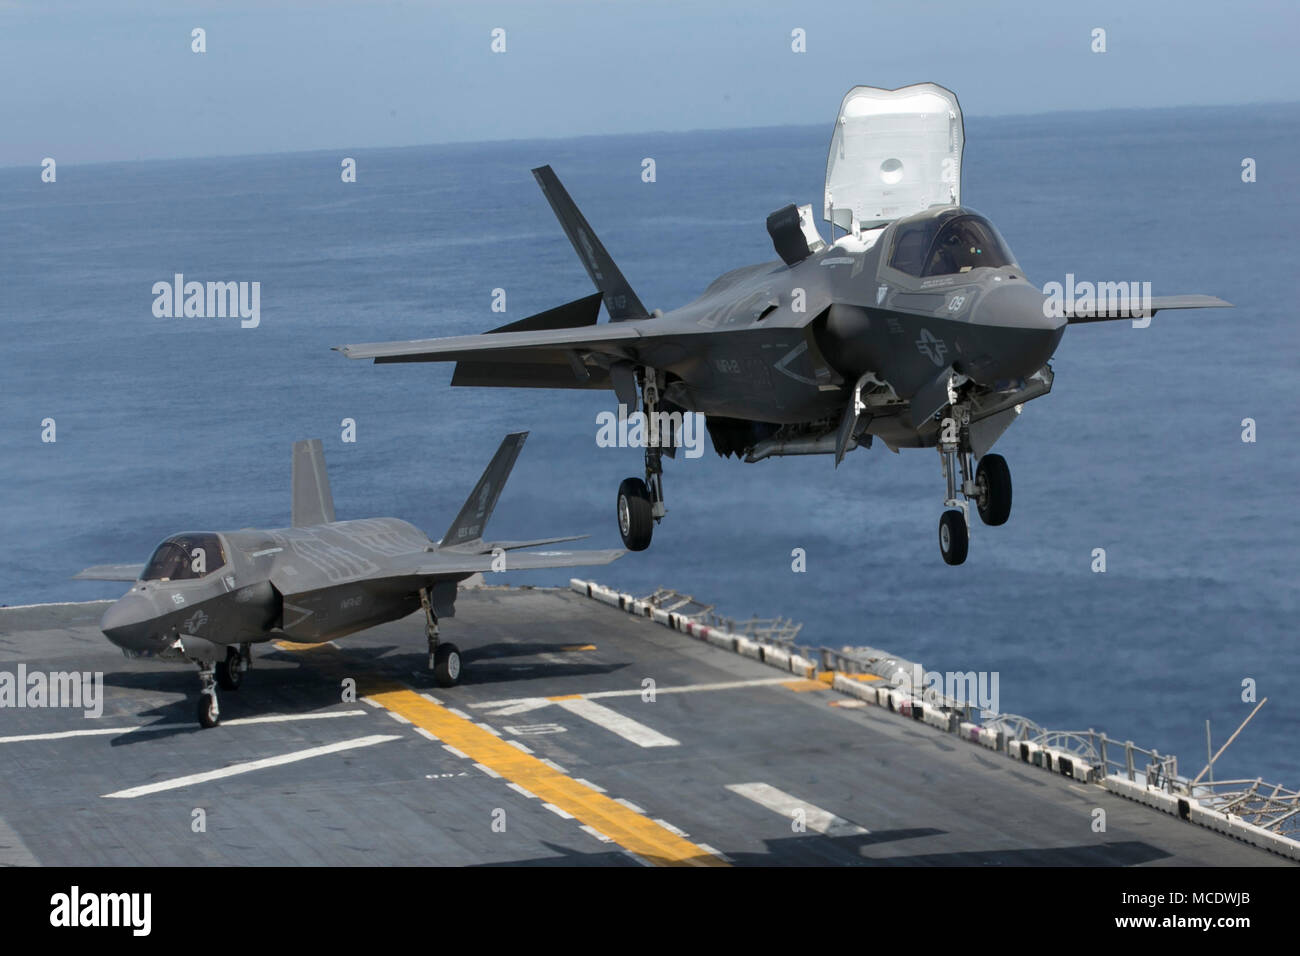 An F-35B Lightning II prepares to land on the flight deck of the USS Wasp (LHD-1) while off the coast of Okinawa, Japan, April 13, 2018. A detachment of F-35Bs with Marine Fighter Attack Squadron 121 joined the USS Wasp for Spring Patrol 2018, marking the F-35’s first operational deployment with a MEU. As the Marine Corps’ only continuously forward-deployed MEU, the 31st Marine Expeditionary Unit provides a flexible force ready to perform a wide range of military operations throughout the Indo-Pacific region. (U.S. Marine Corps photo by Lance Cpl. Amy Phan/Released) Stock Photo